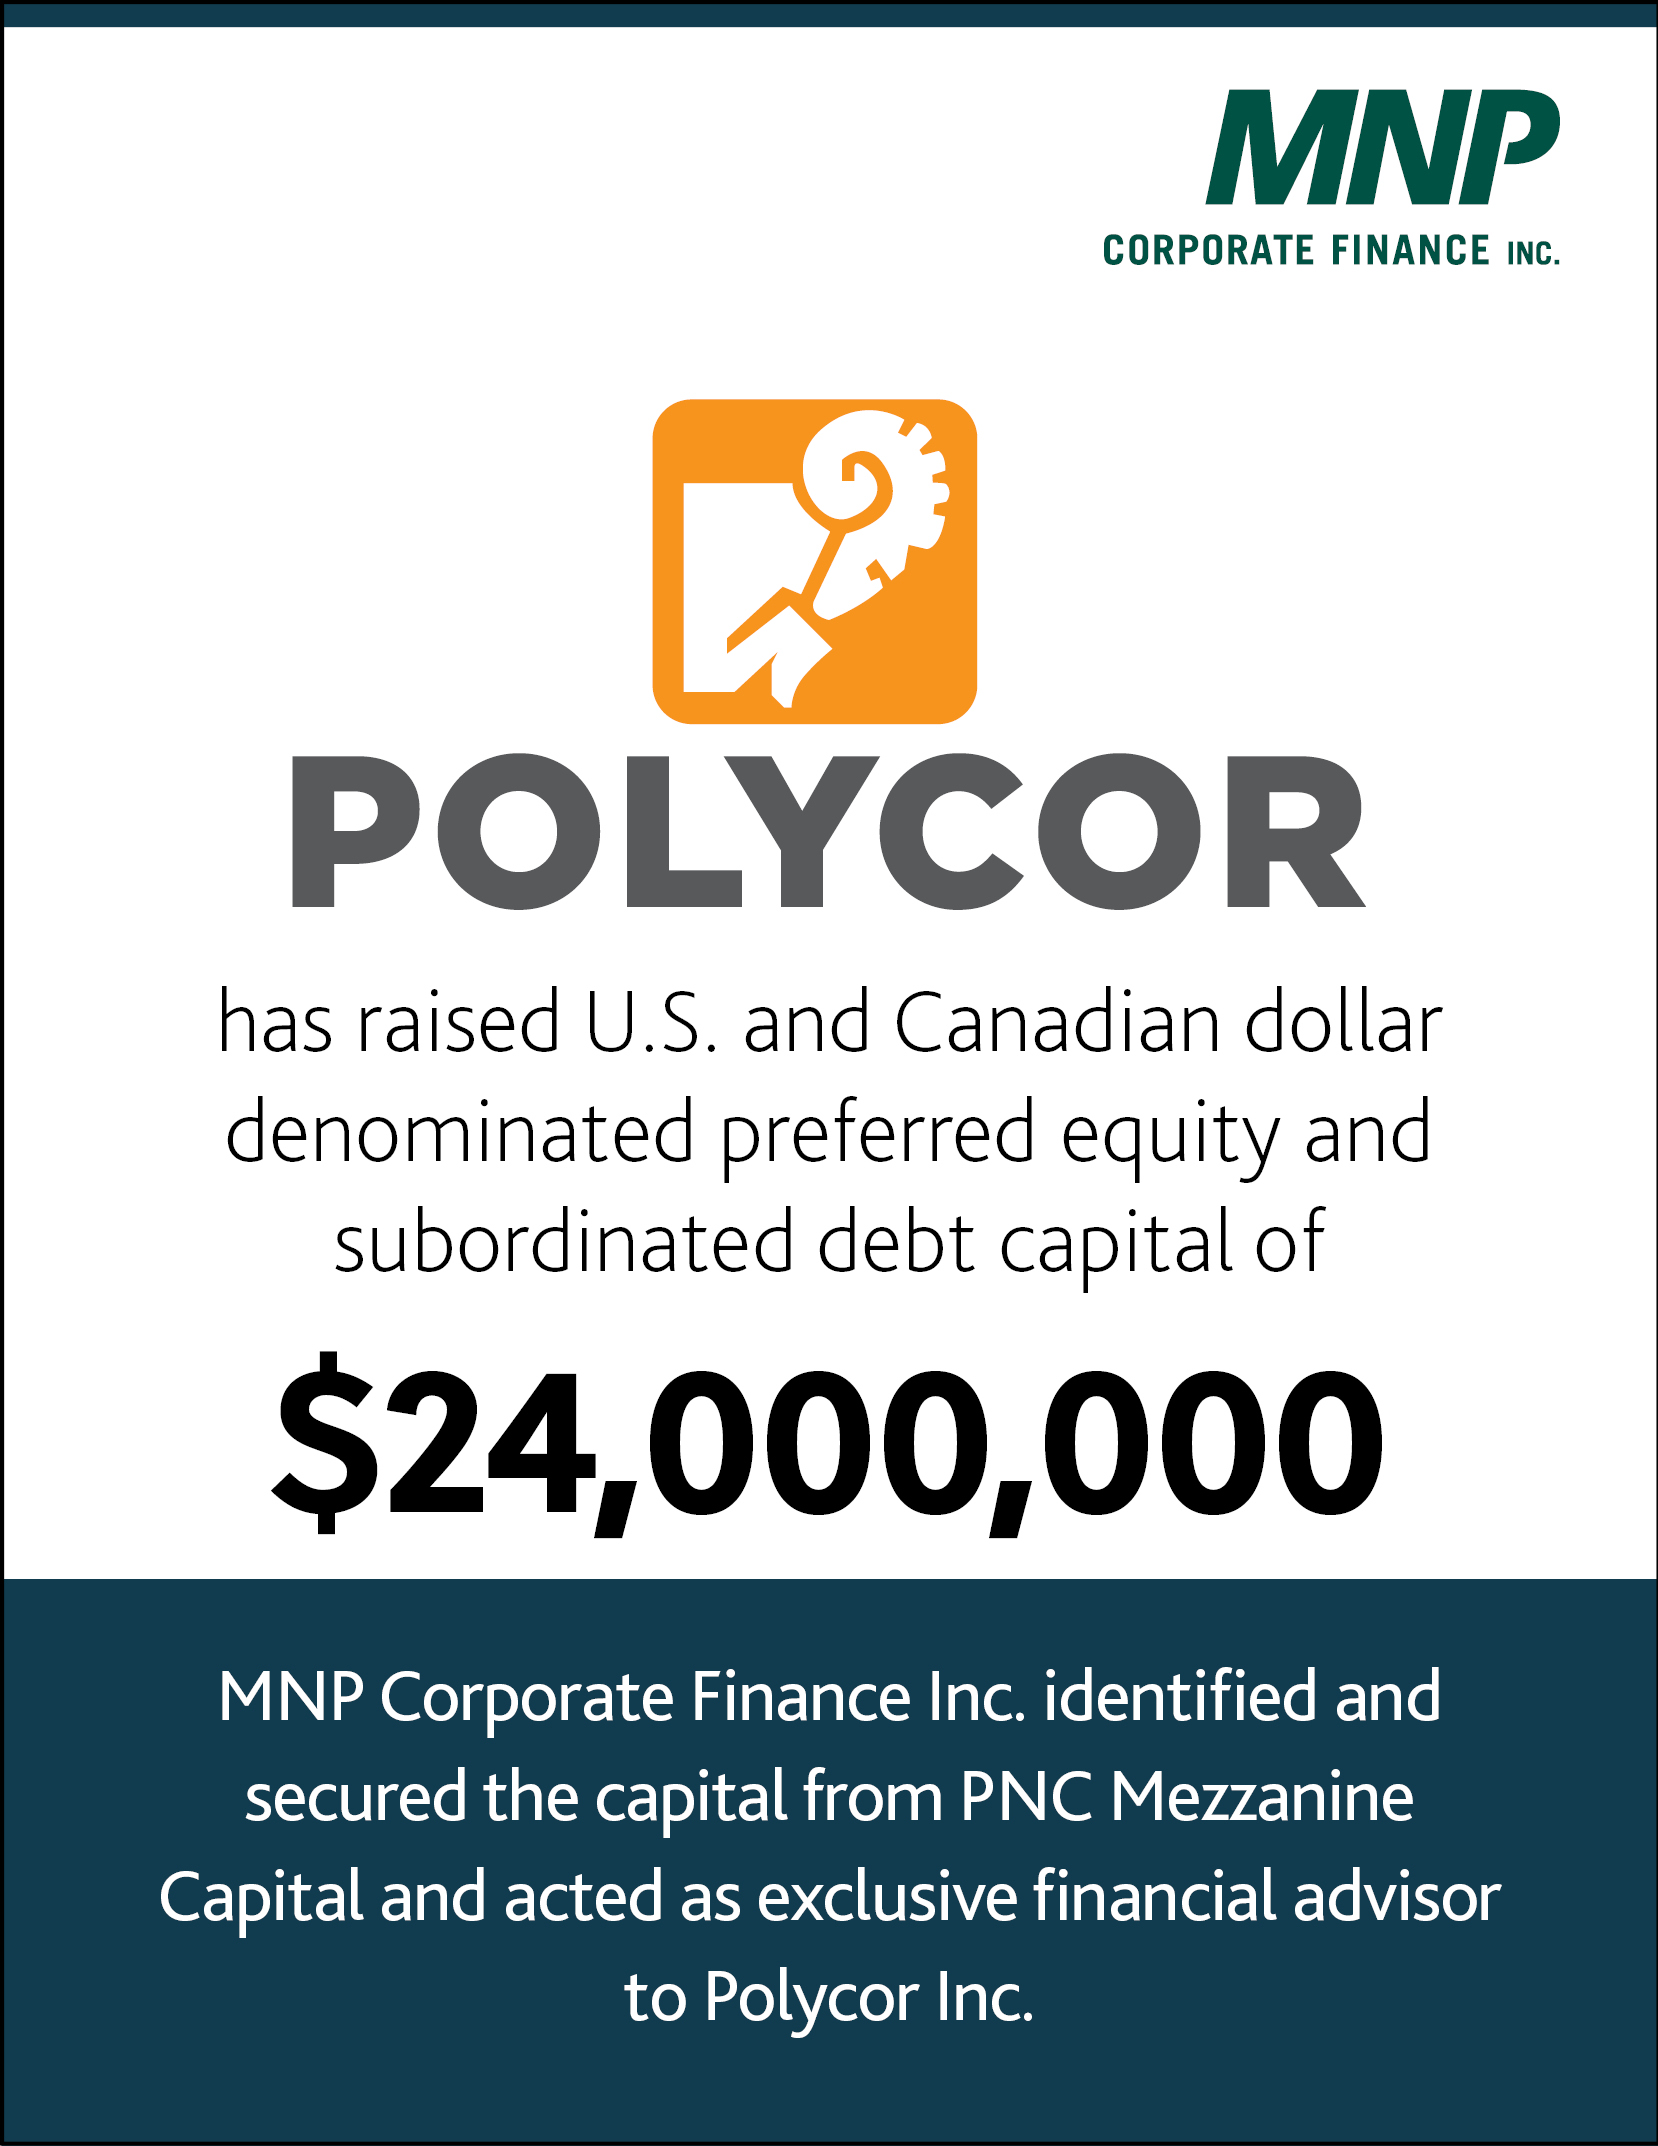 Polycor has raises U.S. and Canadian dollar denominated preferred equity and subordinated debt capital of $24,000,000